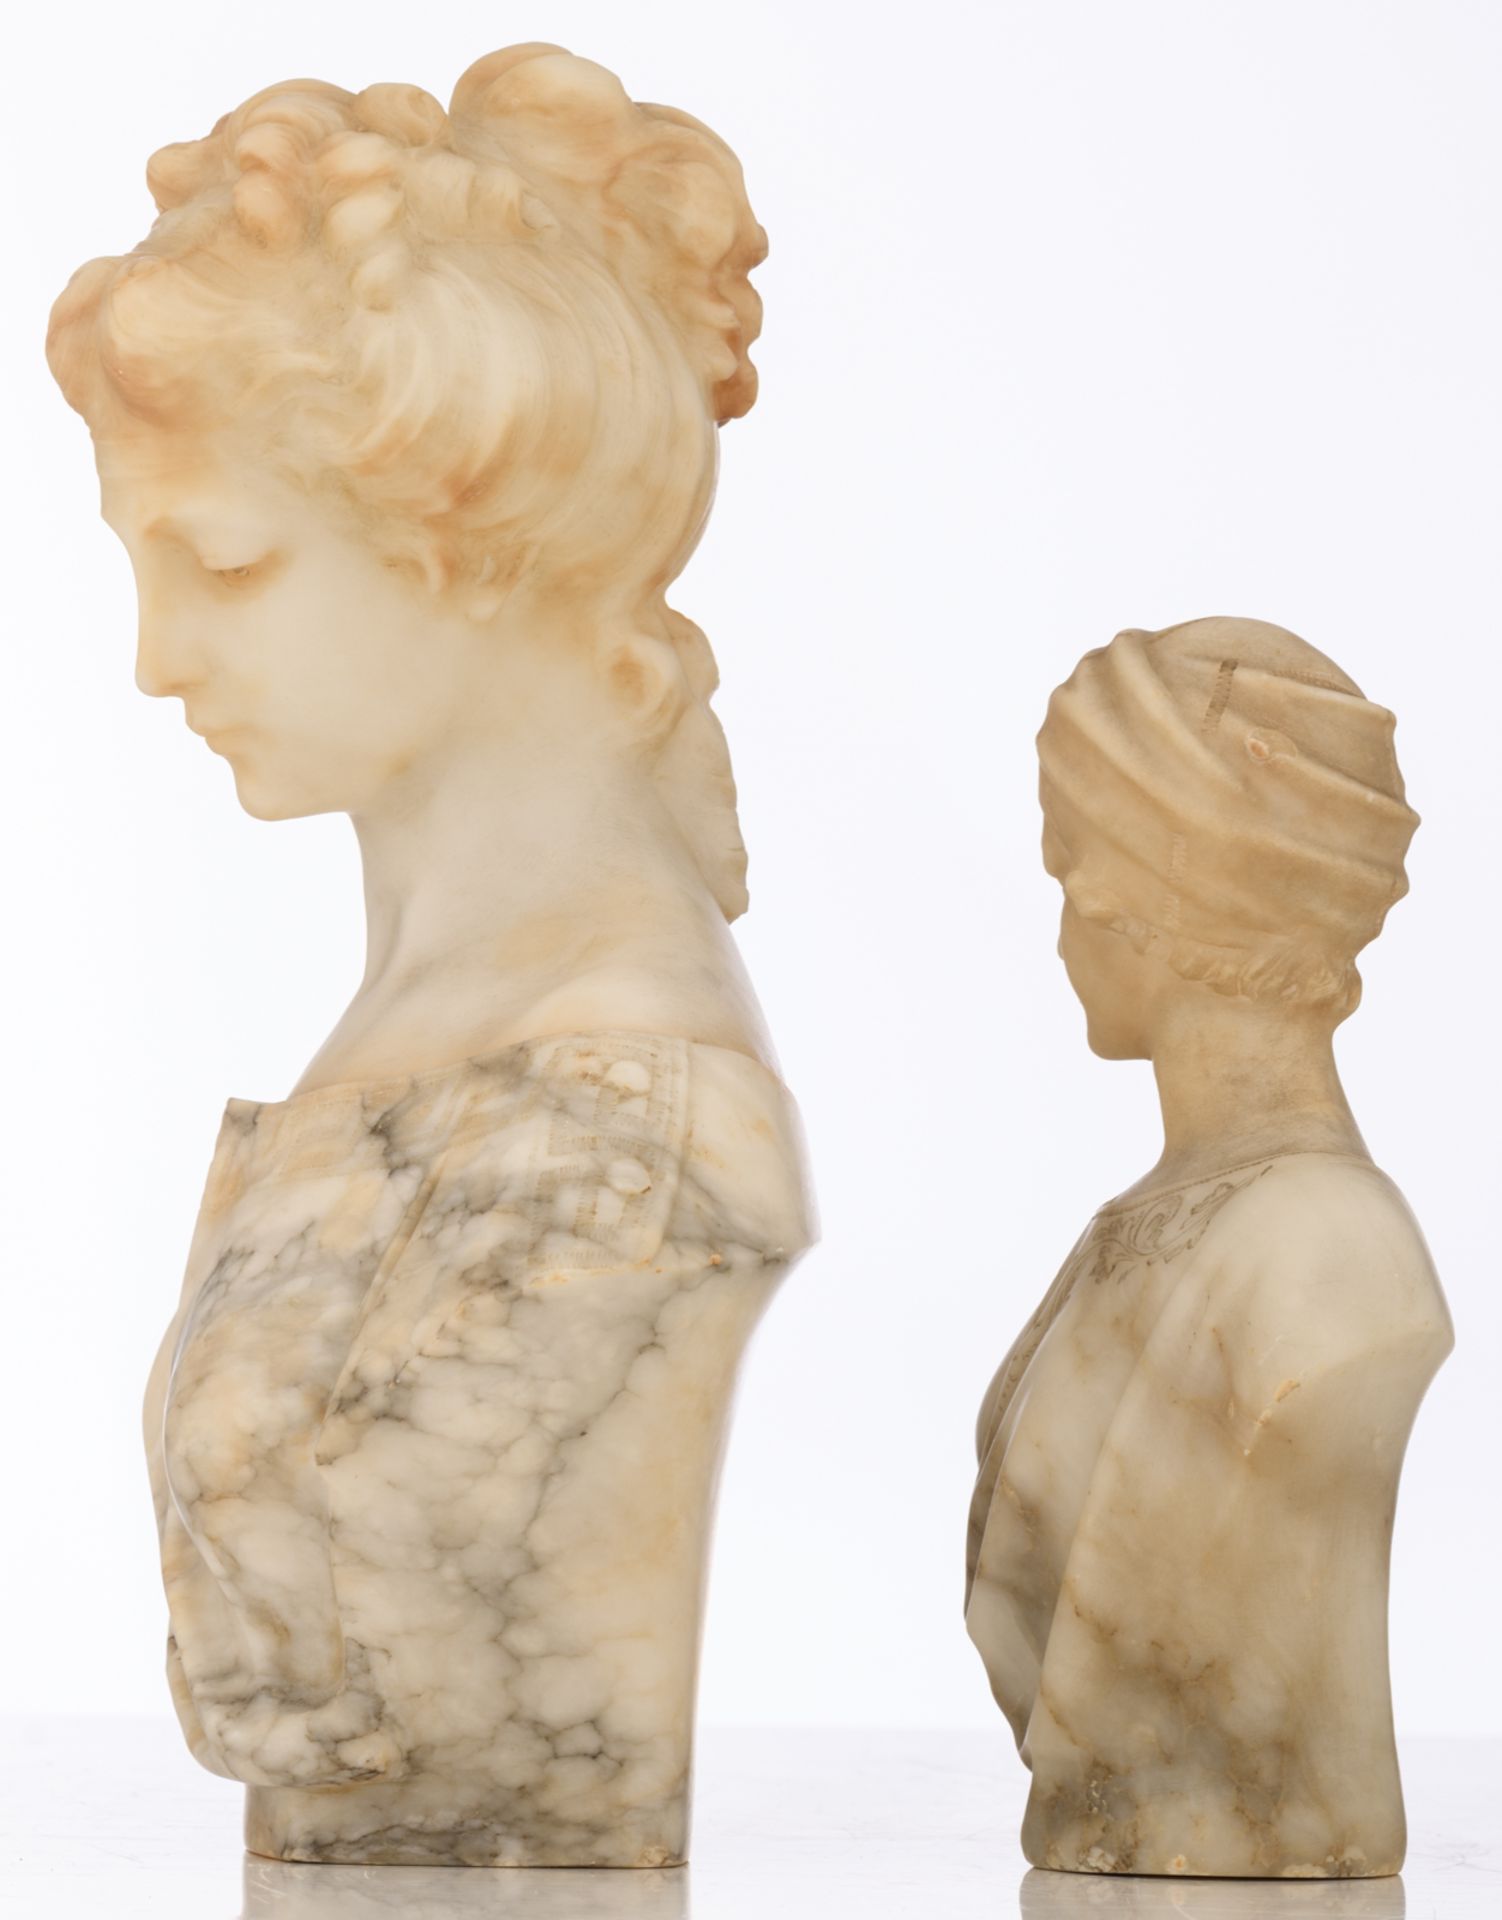 Puggi, two busts of beauties, Carrara marble, H 24,5 - 35,5 cm - Image 3 of 8